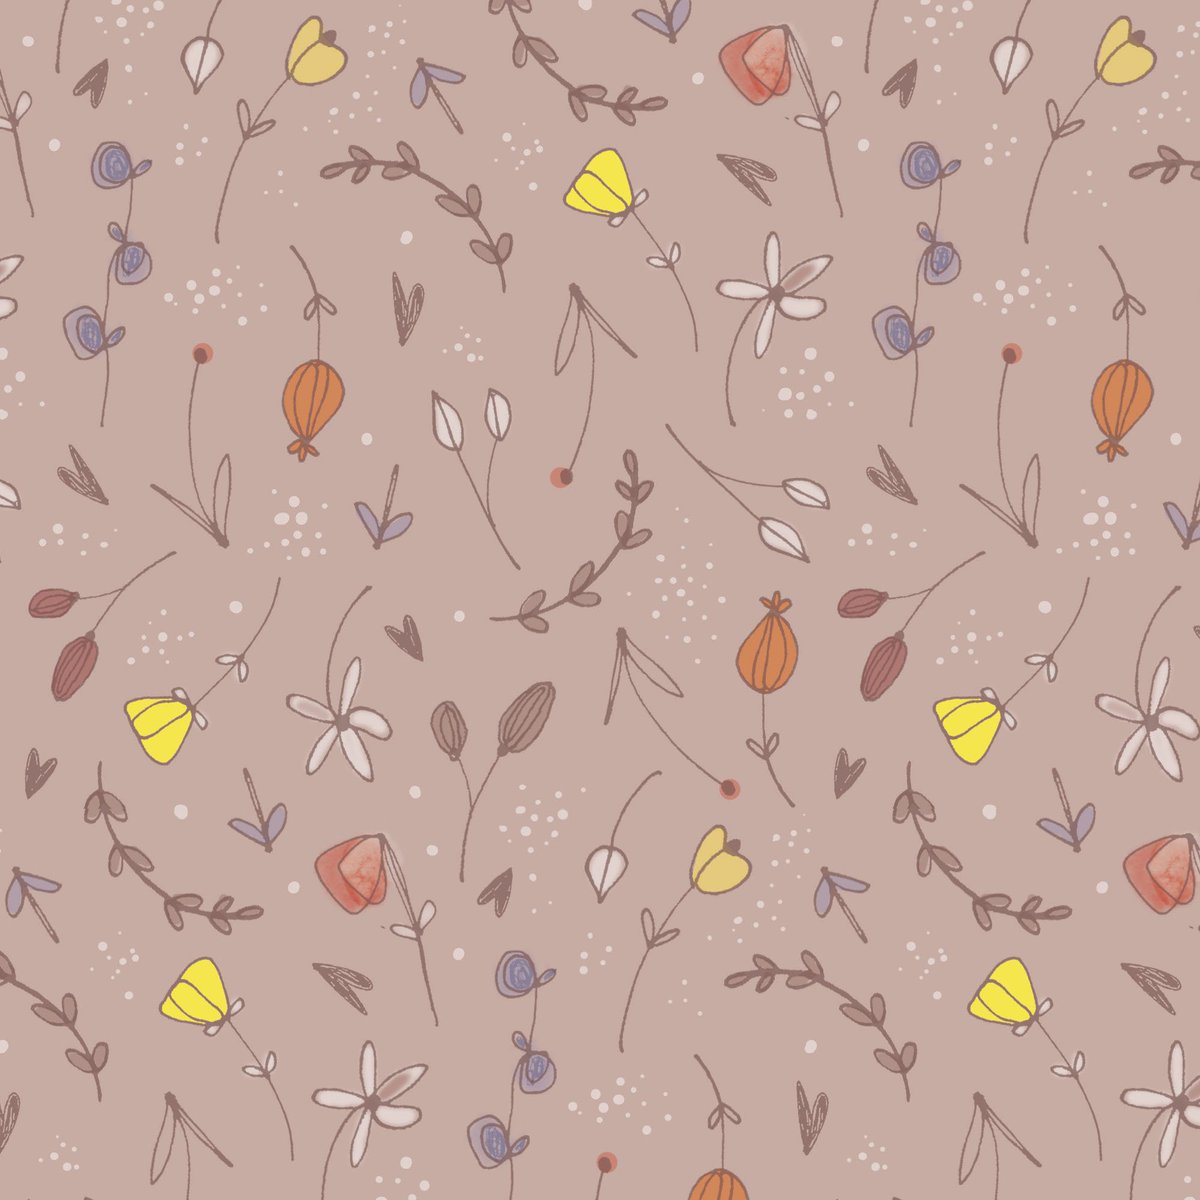 A little repeat pattern with a hint of #CadmiumYellowfor this week's #colour_collective #surfacepattern #patternrepeat #freelanceillustrator #designerforhire #meadowflowers #dreamingofspring